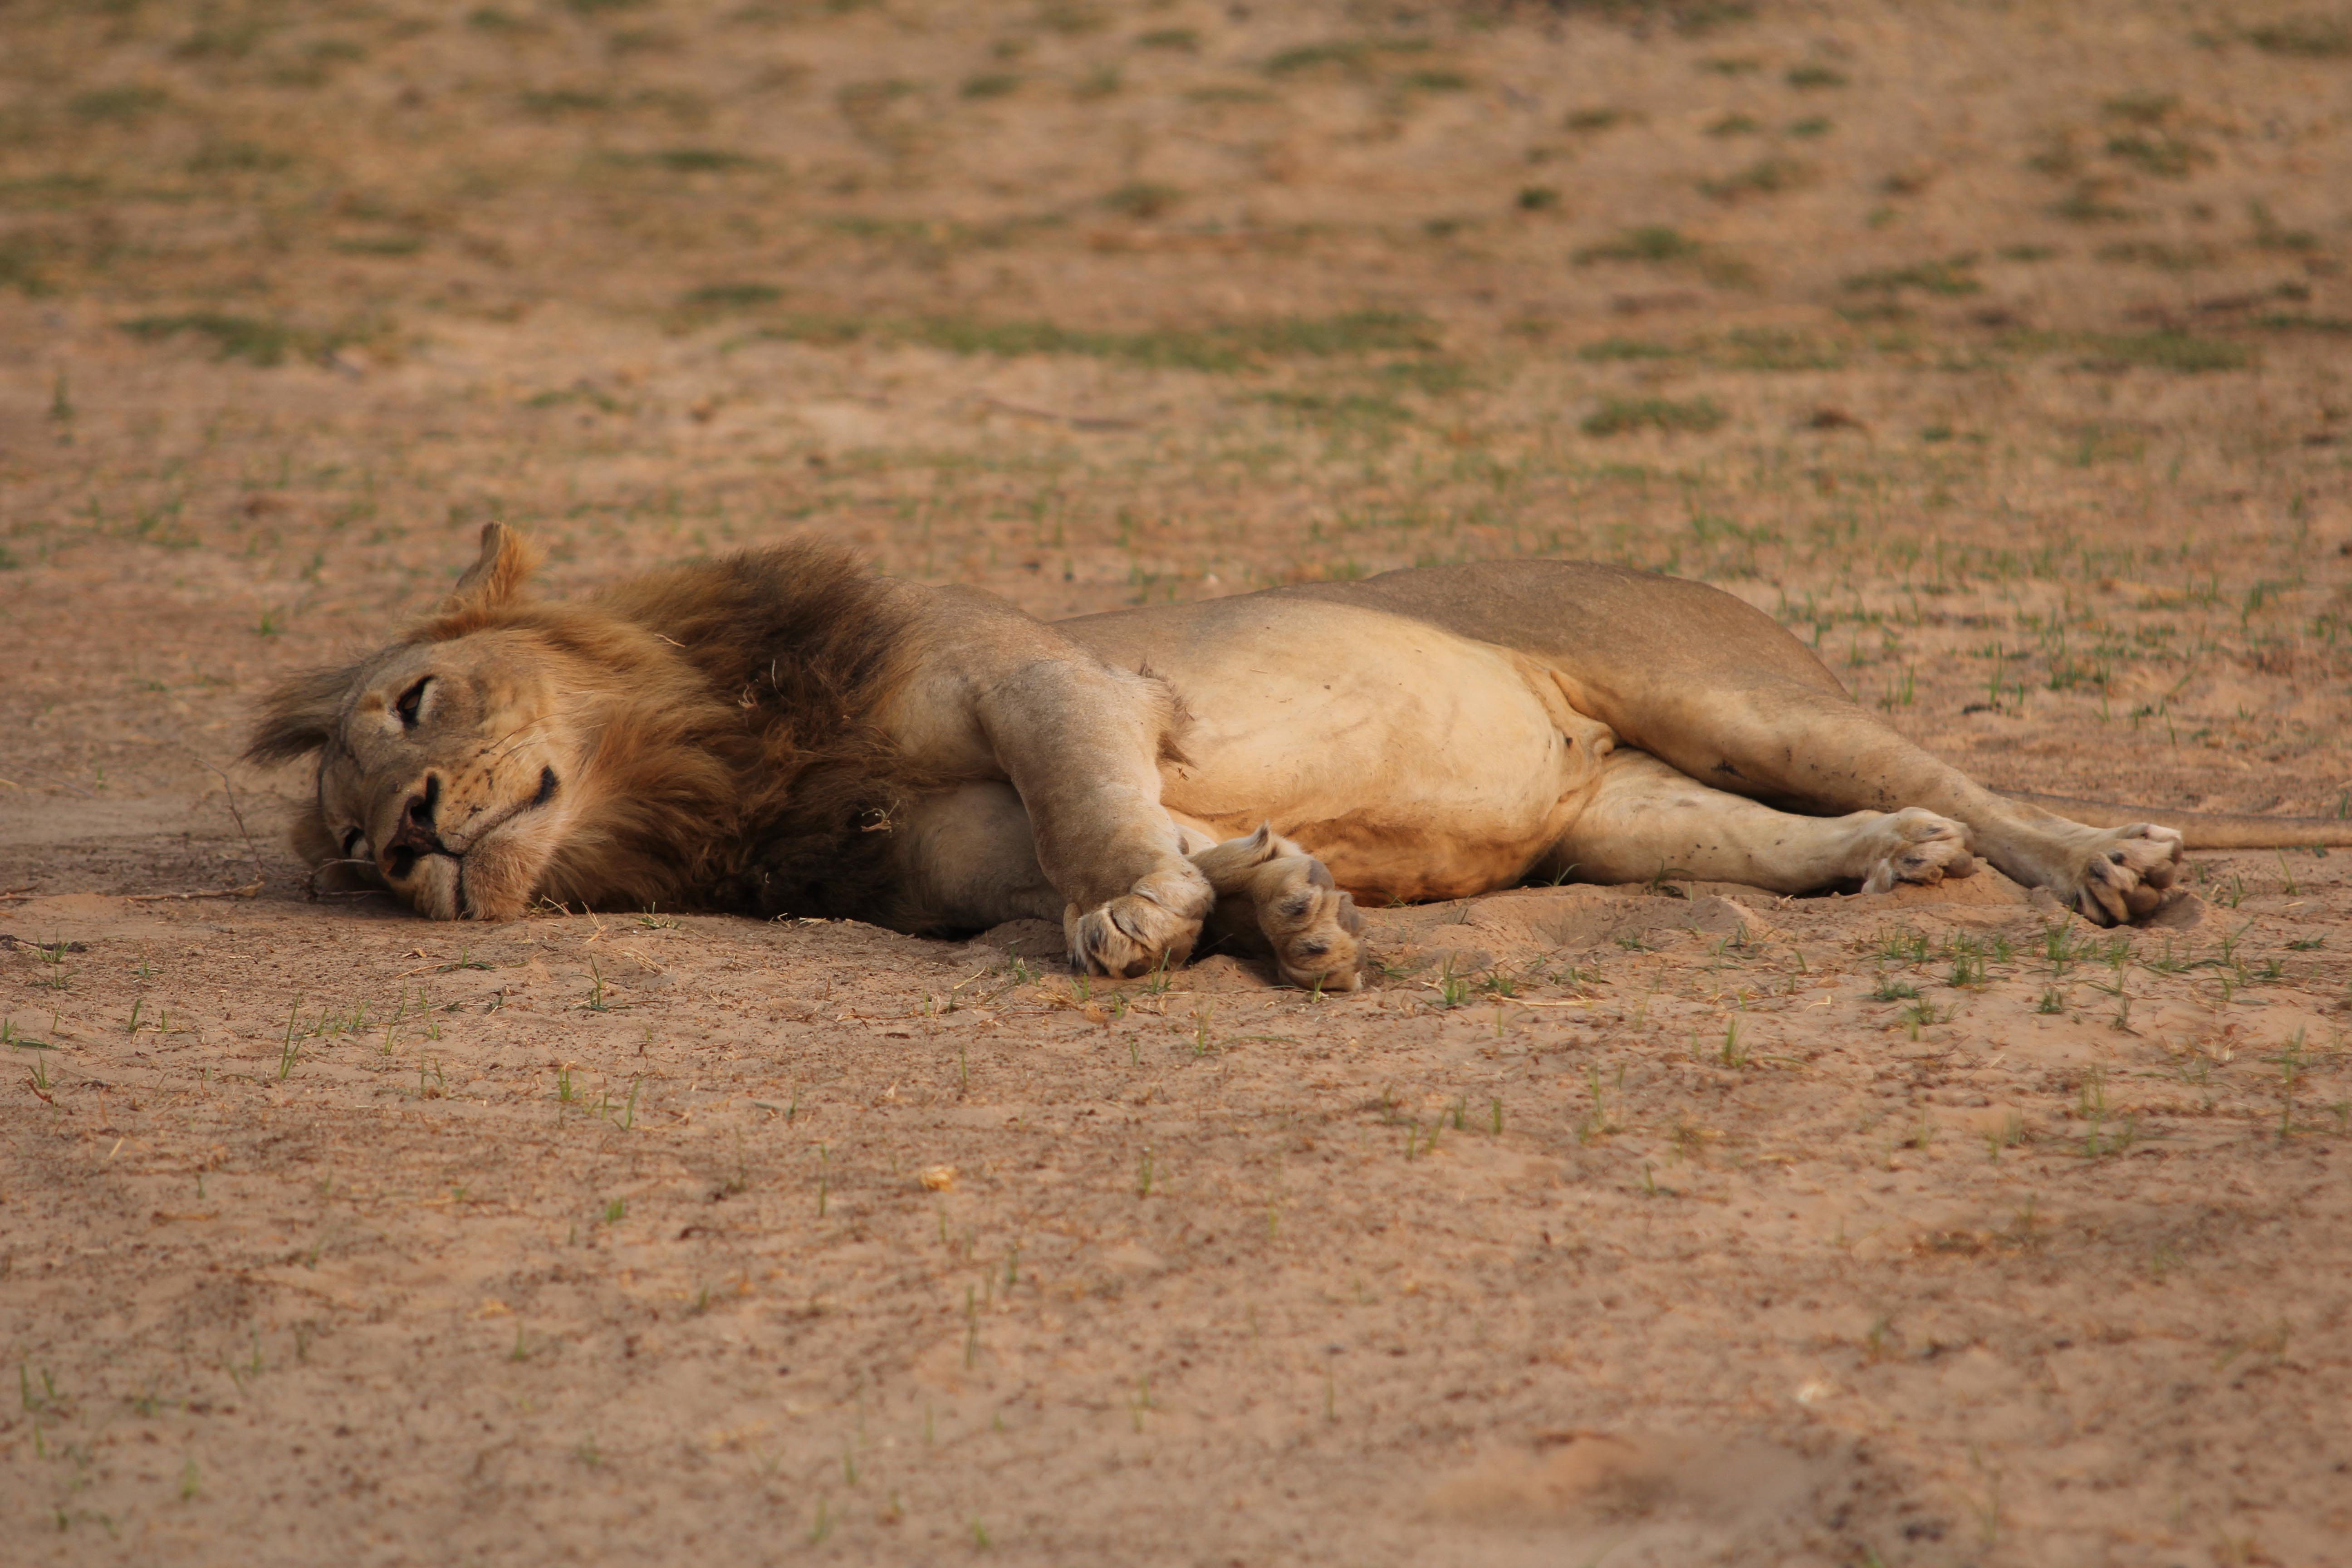 Zambia: Lioness relaxing in the warm sand at the South Luangwa River